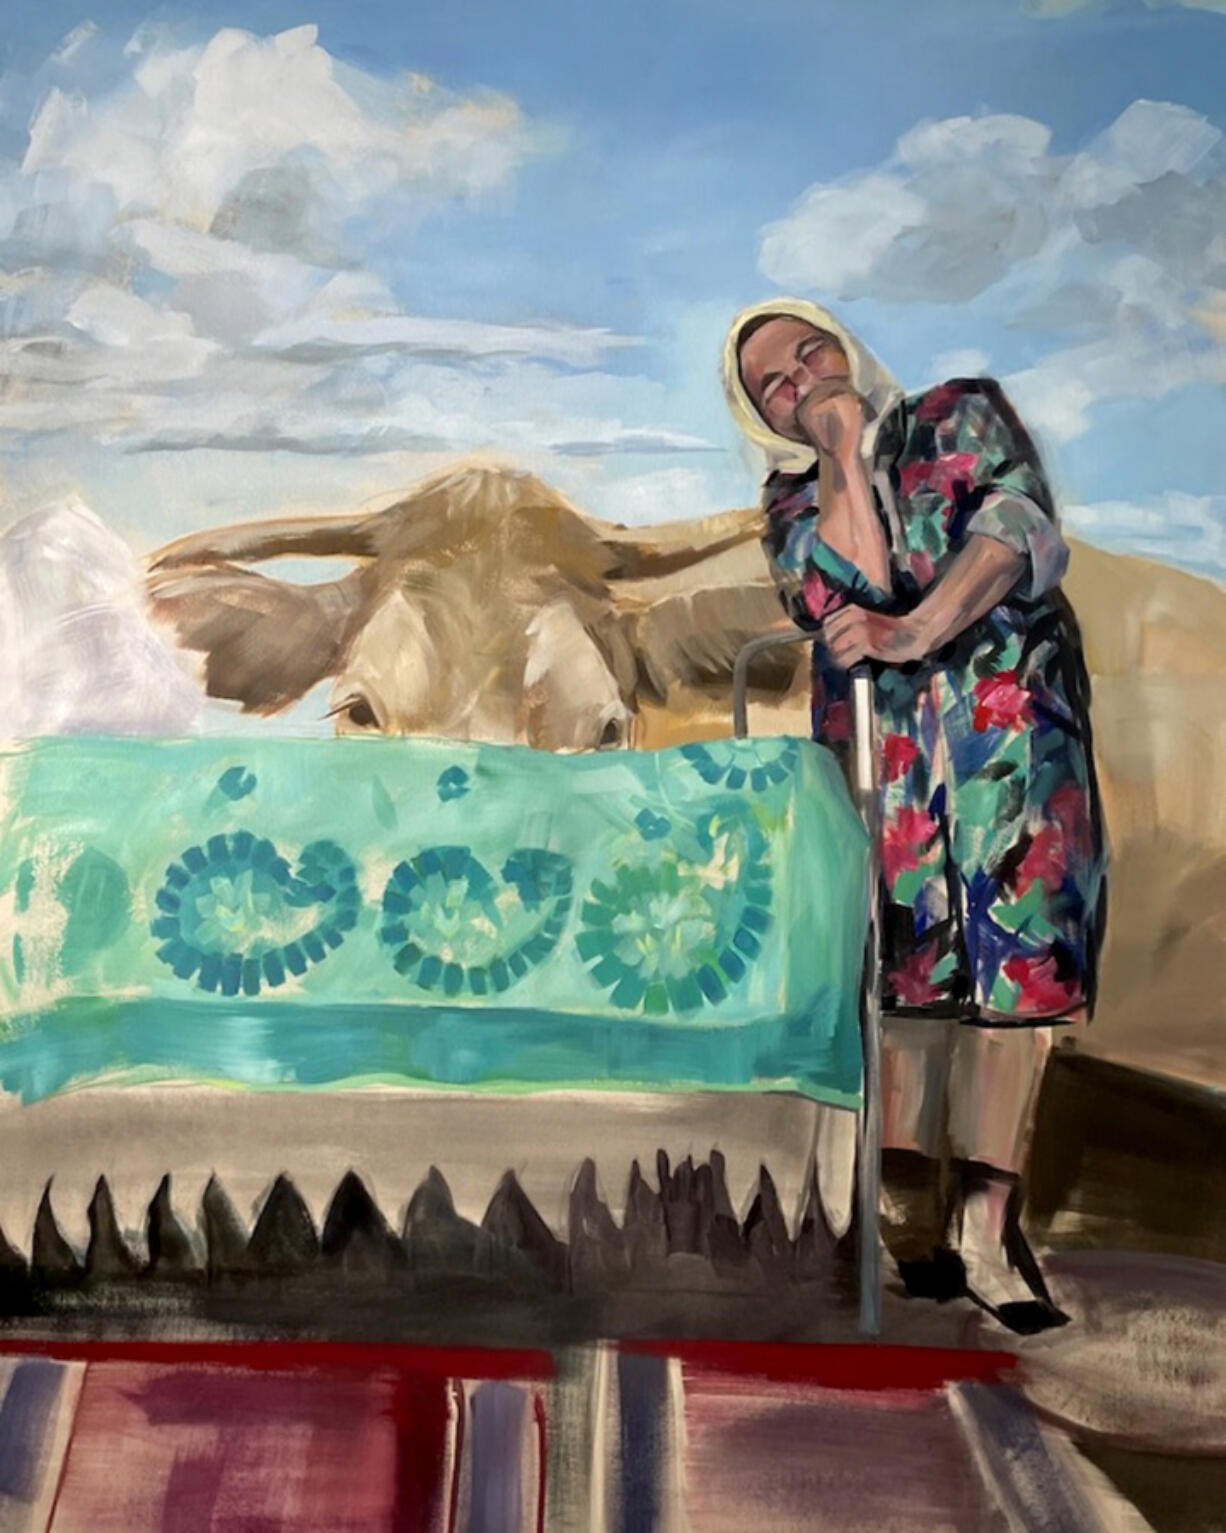 Ukrainian-born artist Tatyana Ostapenko is donating 100 percent of the proceeds from the sale of her art to humanitarian efforts in Ukraine. The exhibit runs through May 6 with artist receptions on April 1 and May 6.